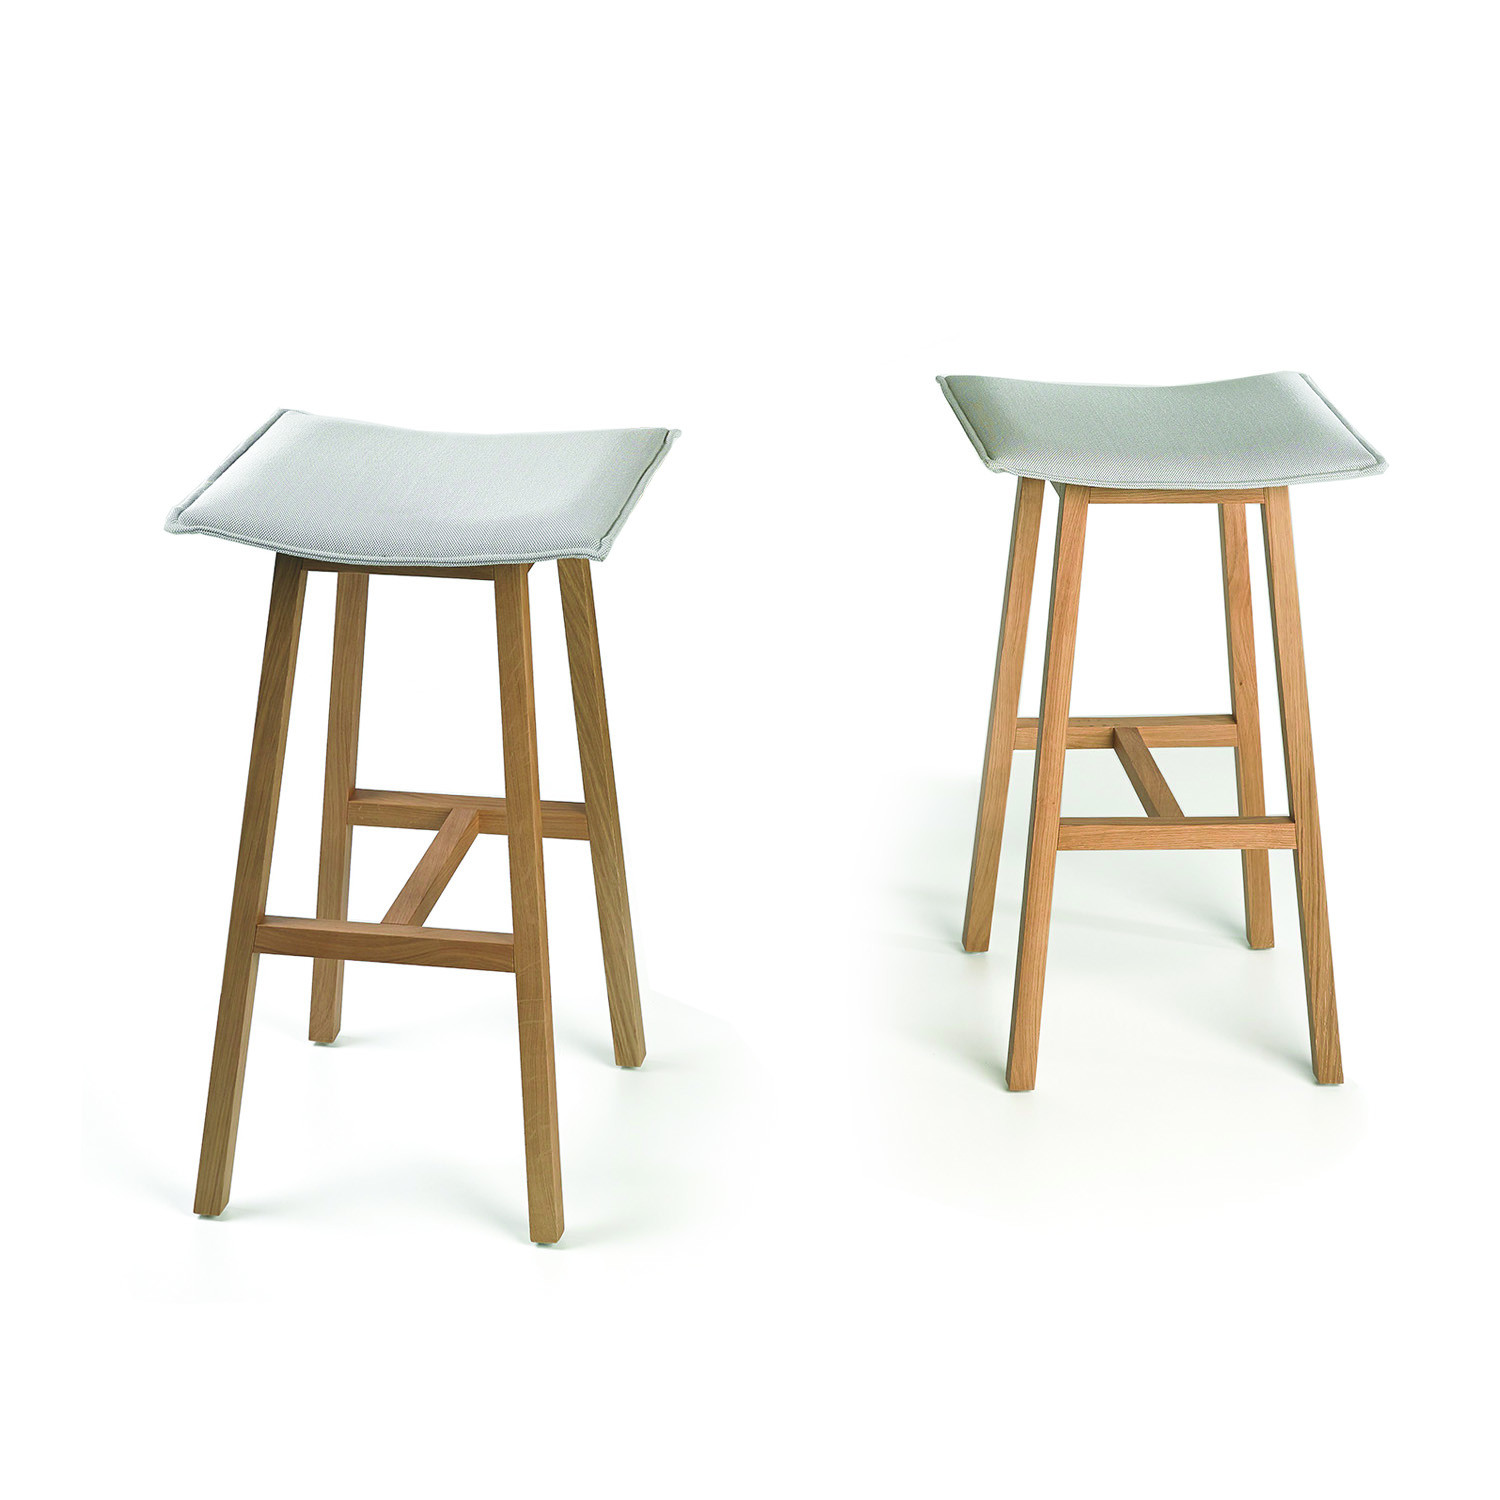 On Your Jays Wooden Cafe Stools